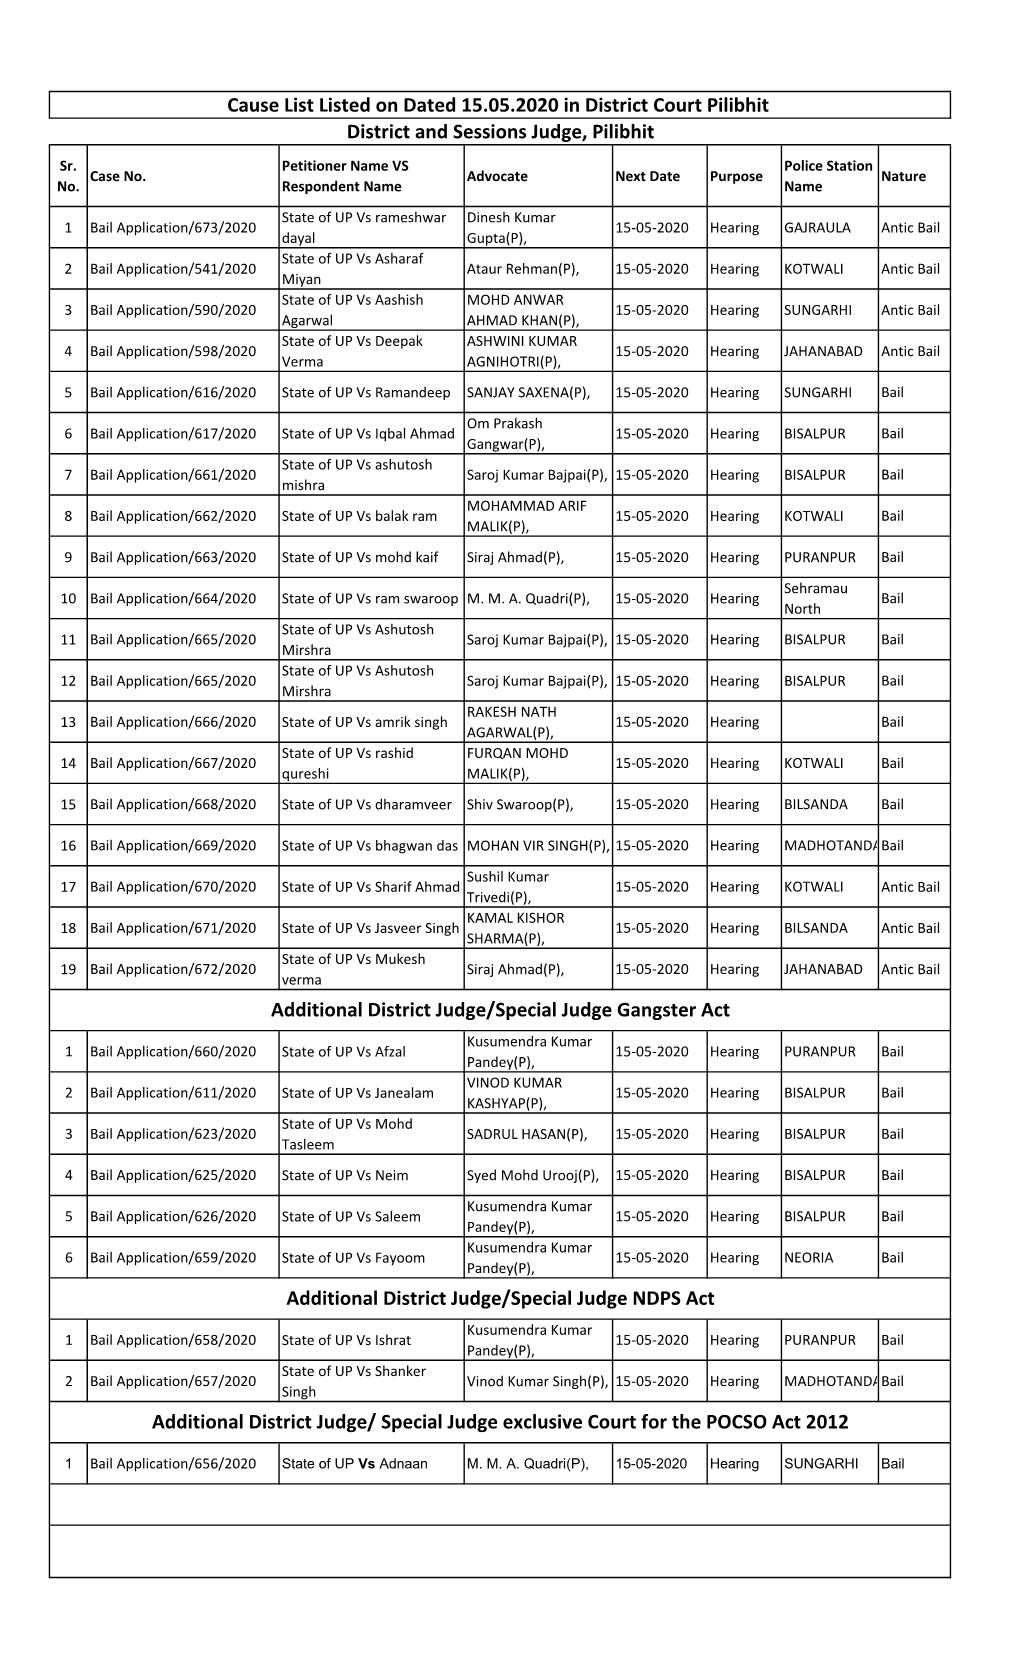 Cause List for Bail Applications Listed 15.05.2020 in The